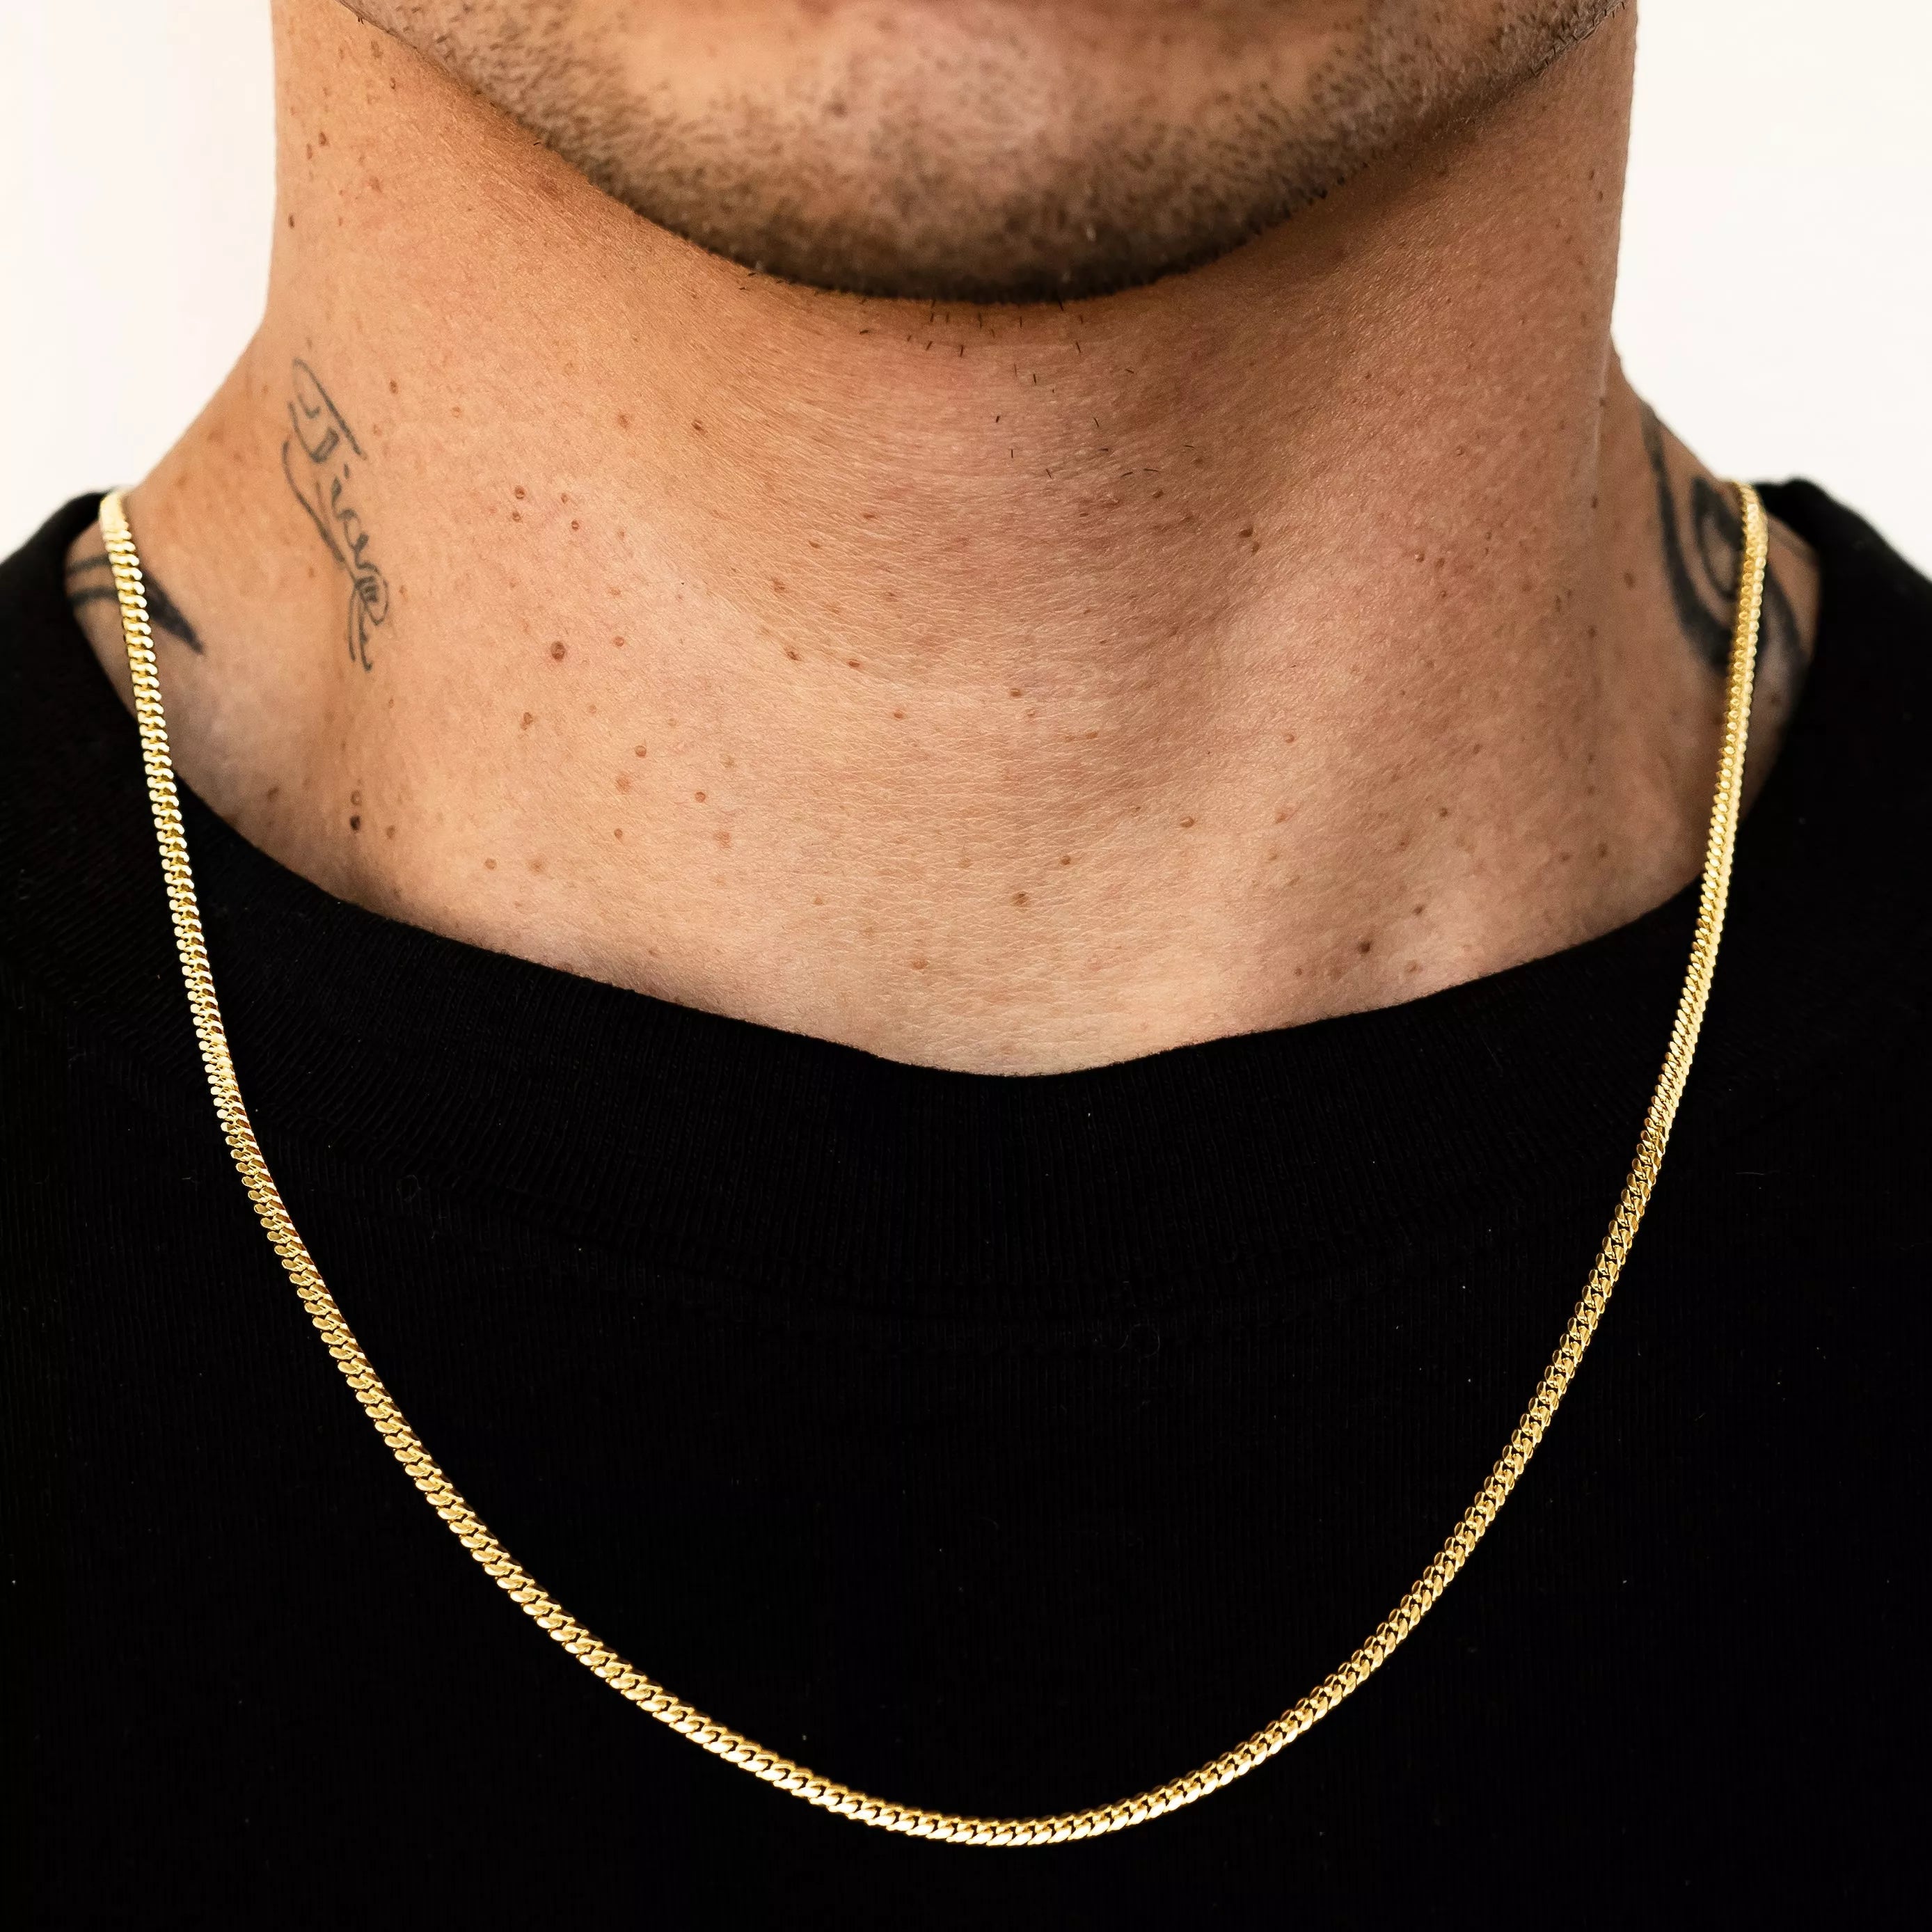 18k Yellow Gold Solid Miami Cuban Chain (2.5MM-4MM)